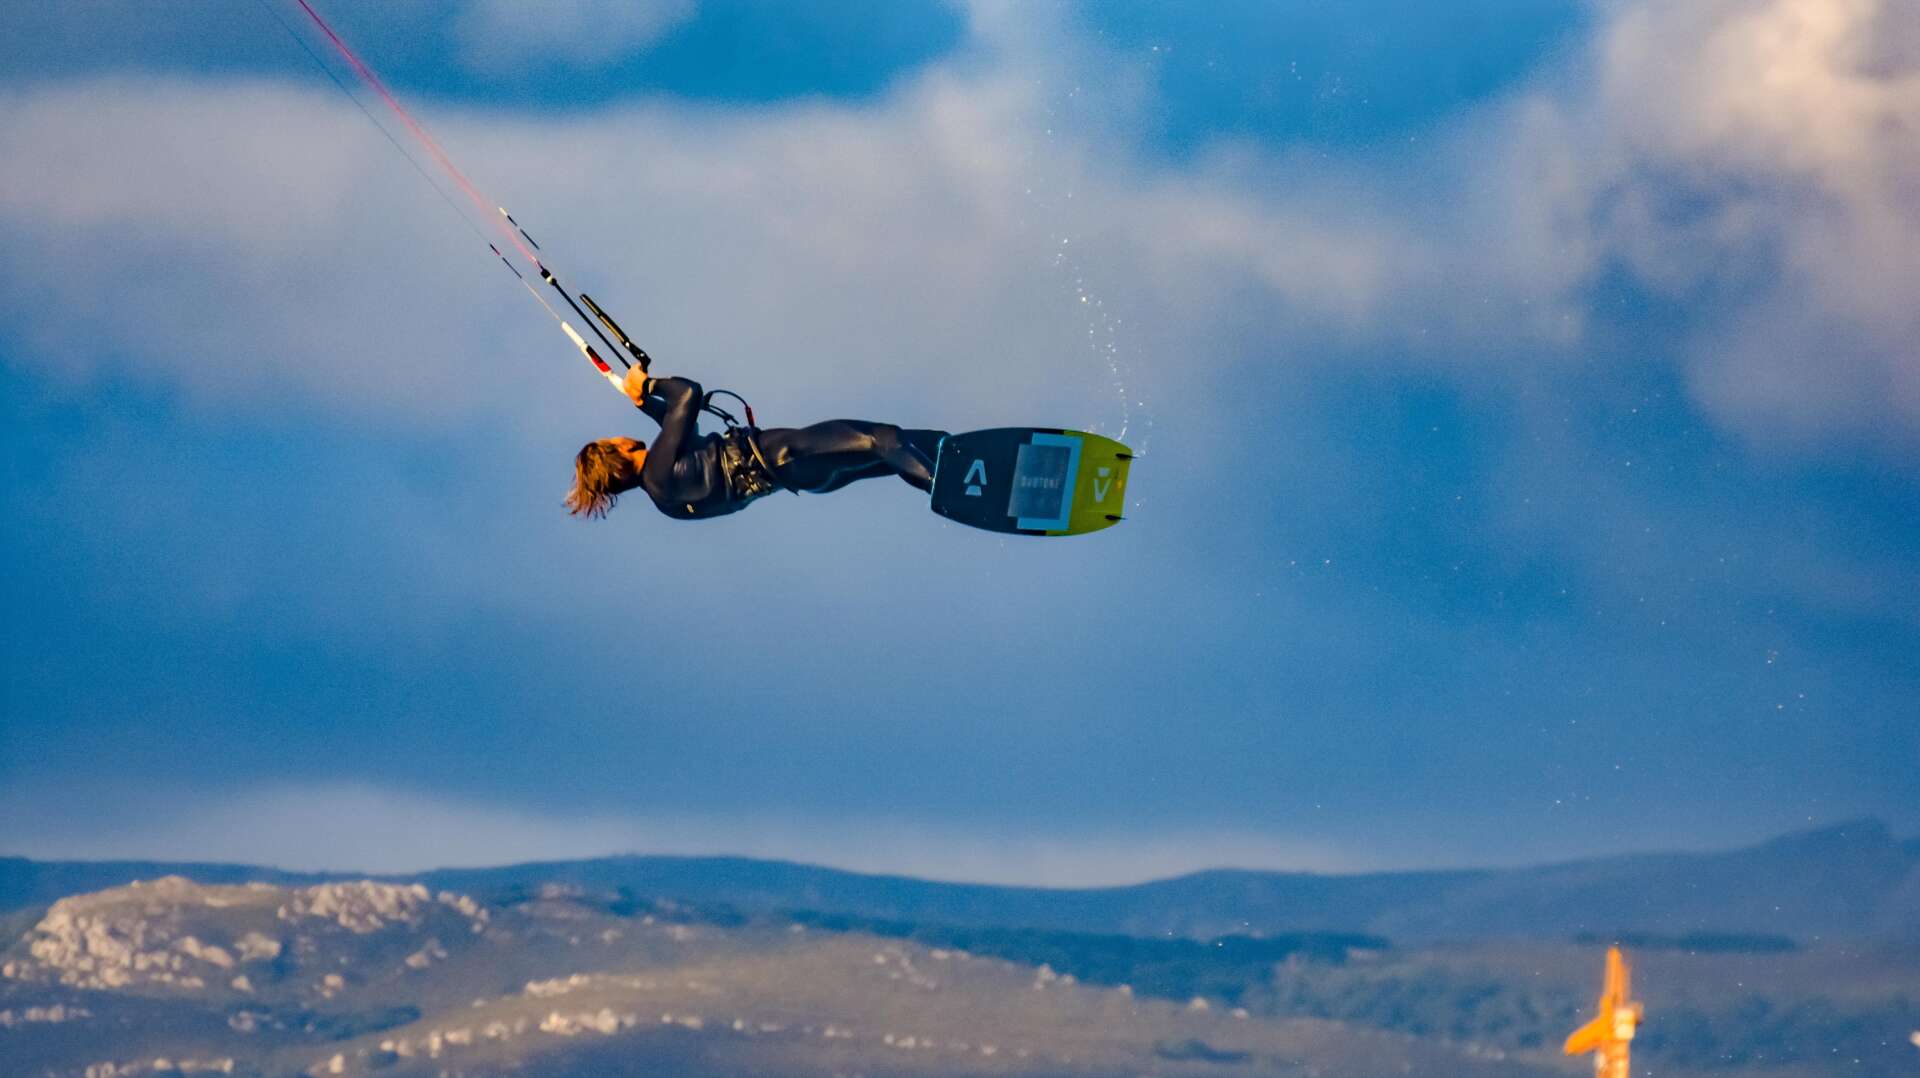 How to jump in kitesurfing